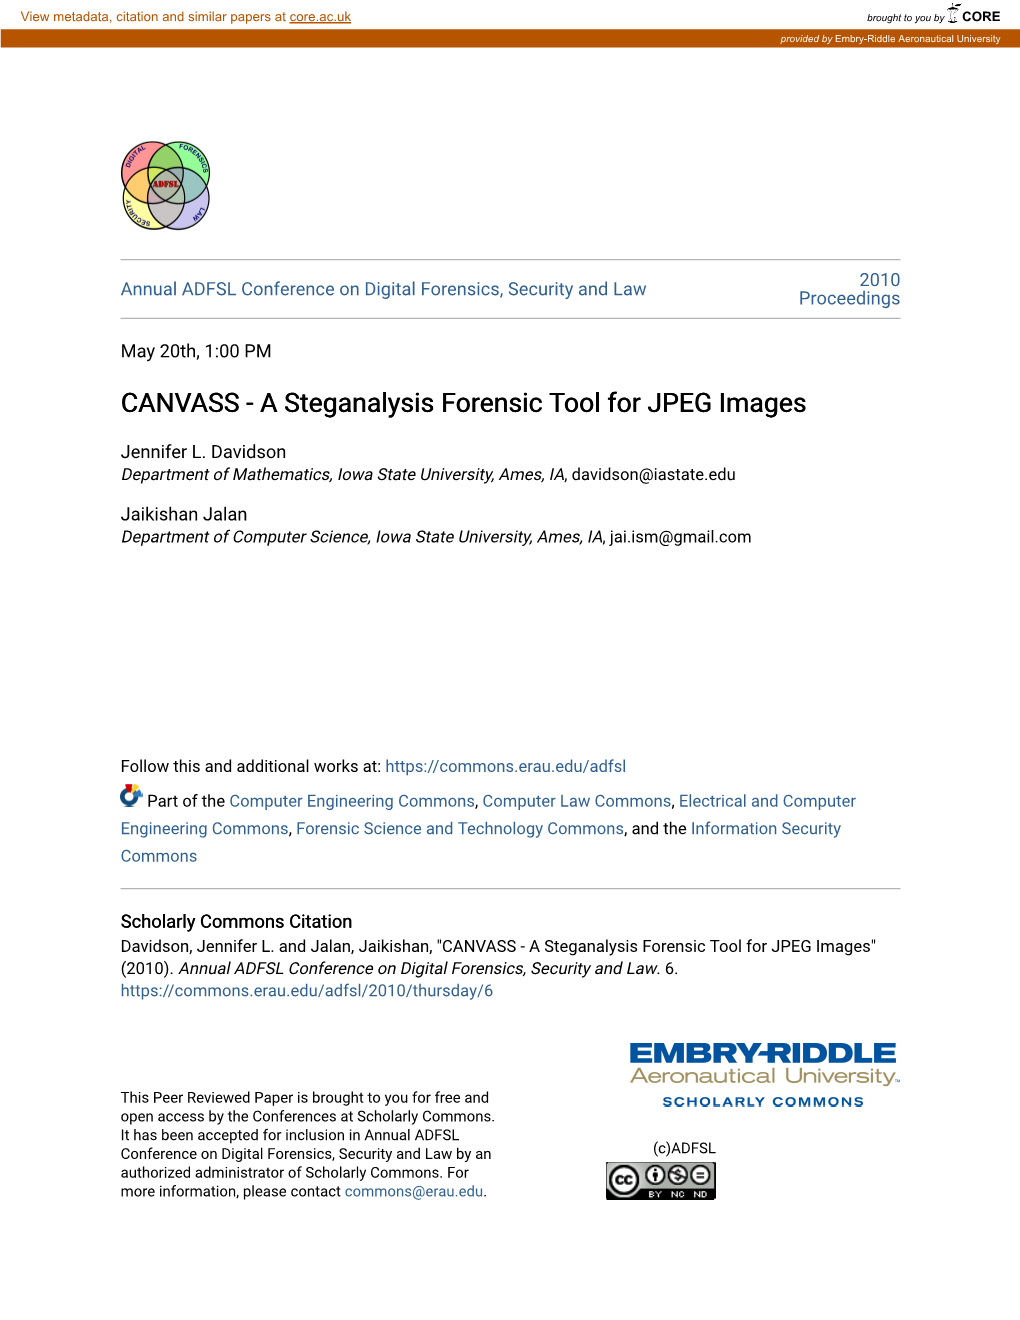 CANVASS - a Steganalysis Forensic Tool for JPEG Images